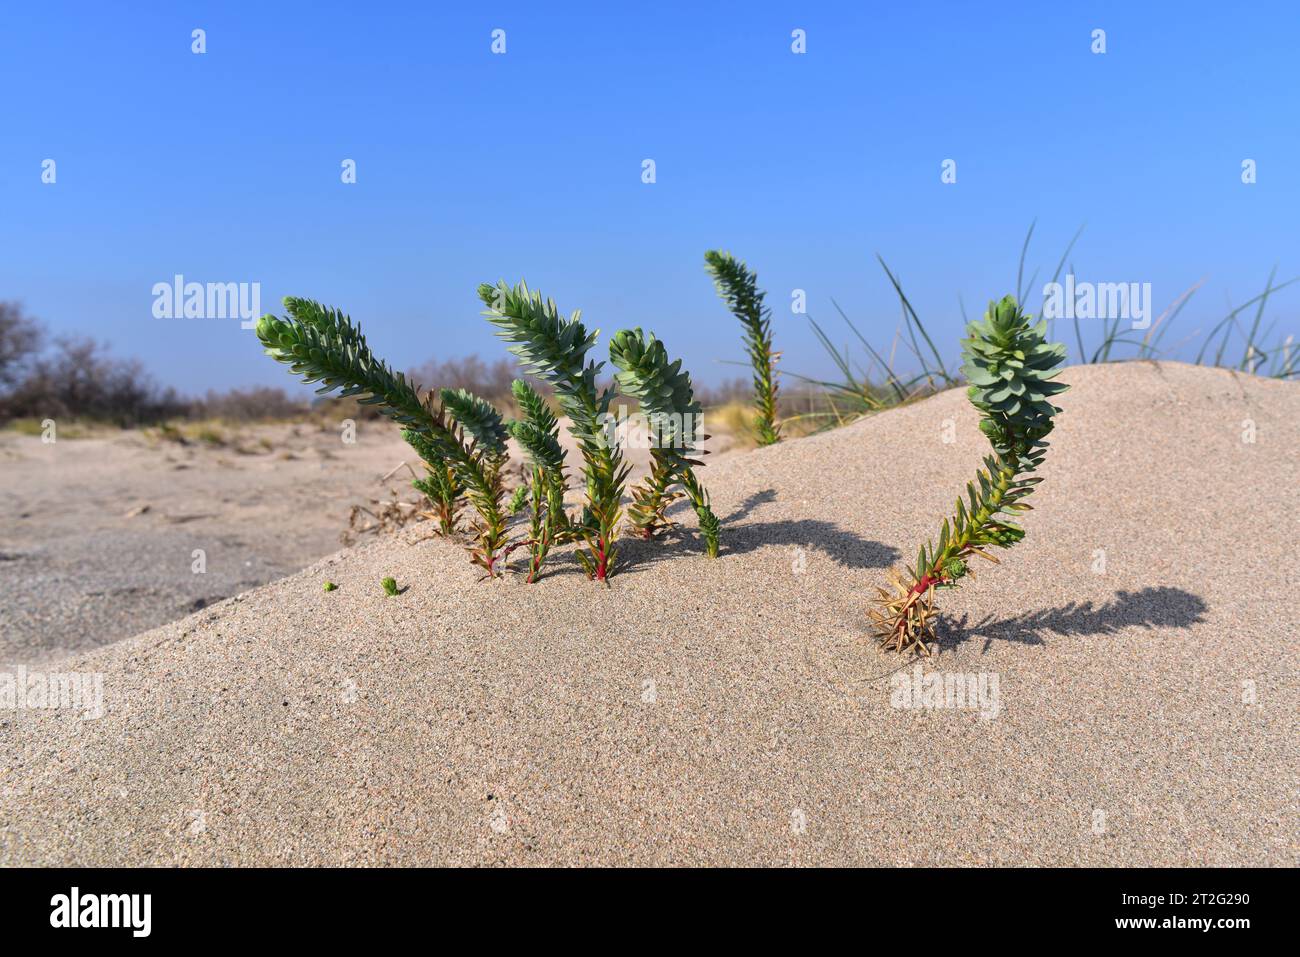 Sea spurge (Euphorbia paralias) is a perennial herb native to coast of Europe, northern Africa and western Asia. This photo was taken in Pals beach, G Stock Photo